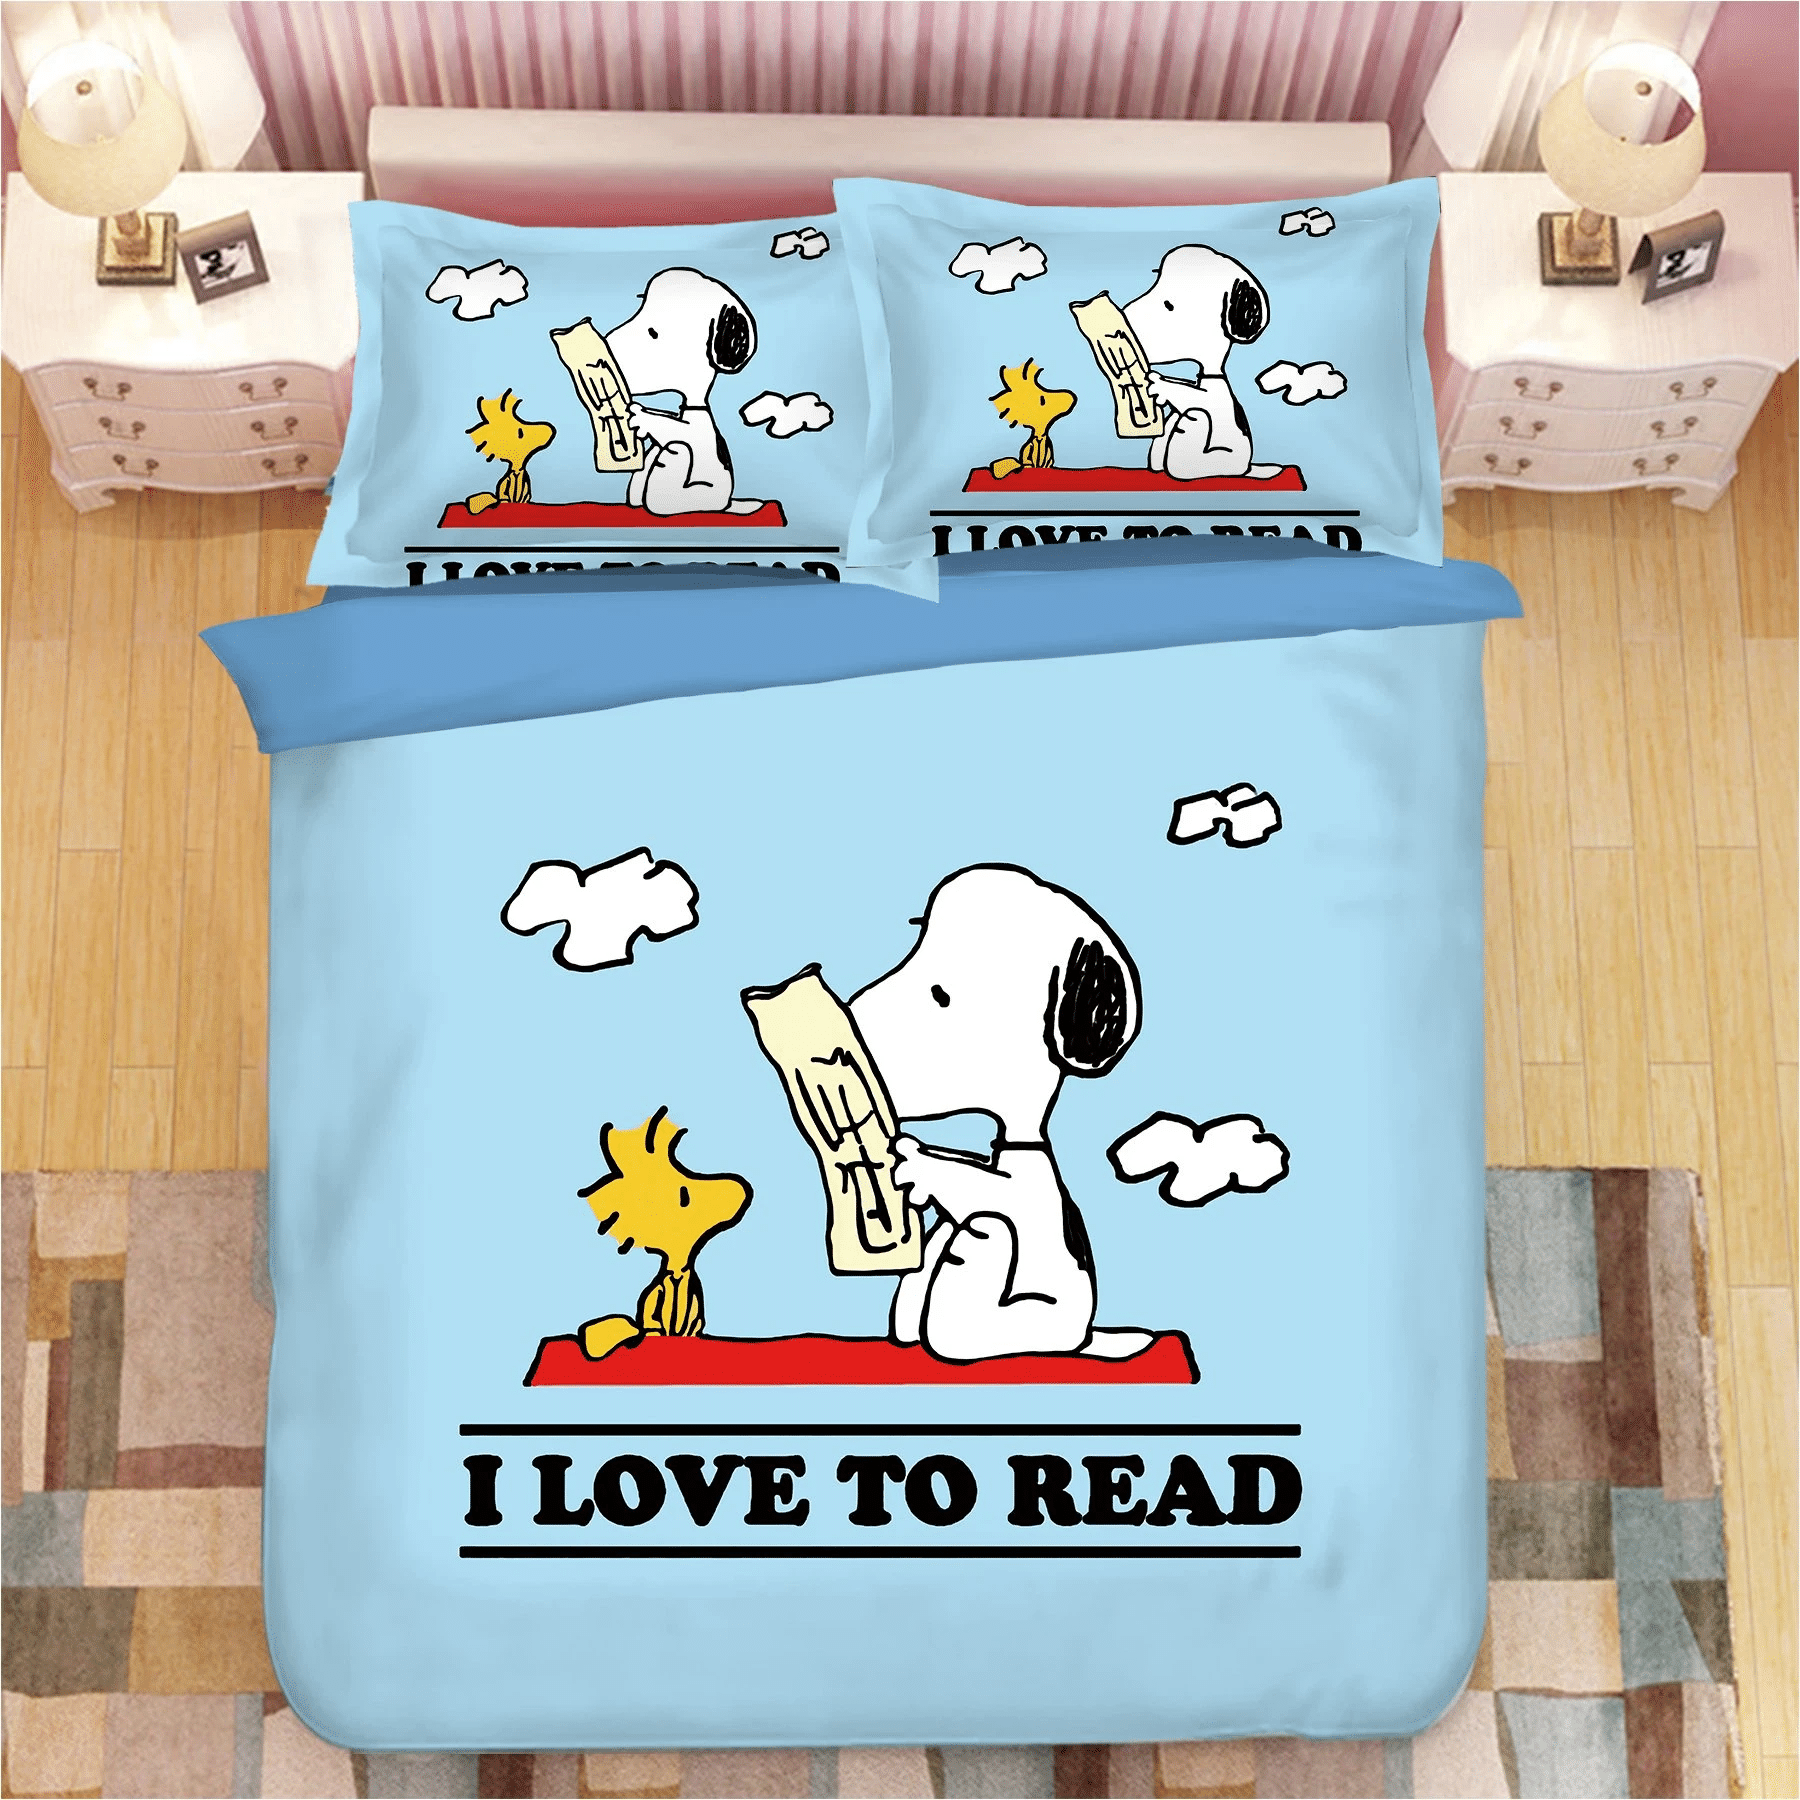 Snoopy 7 Duvet Cover Quilt Cover Pillowcase Bedding Sets Bed